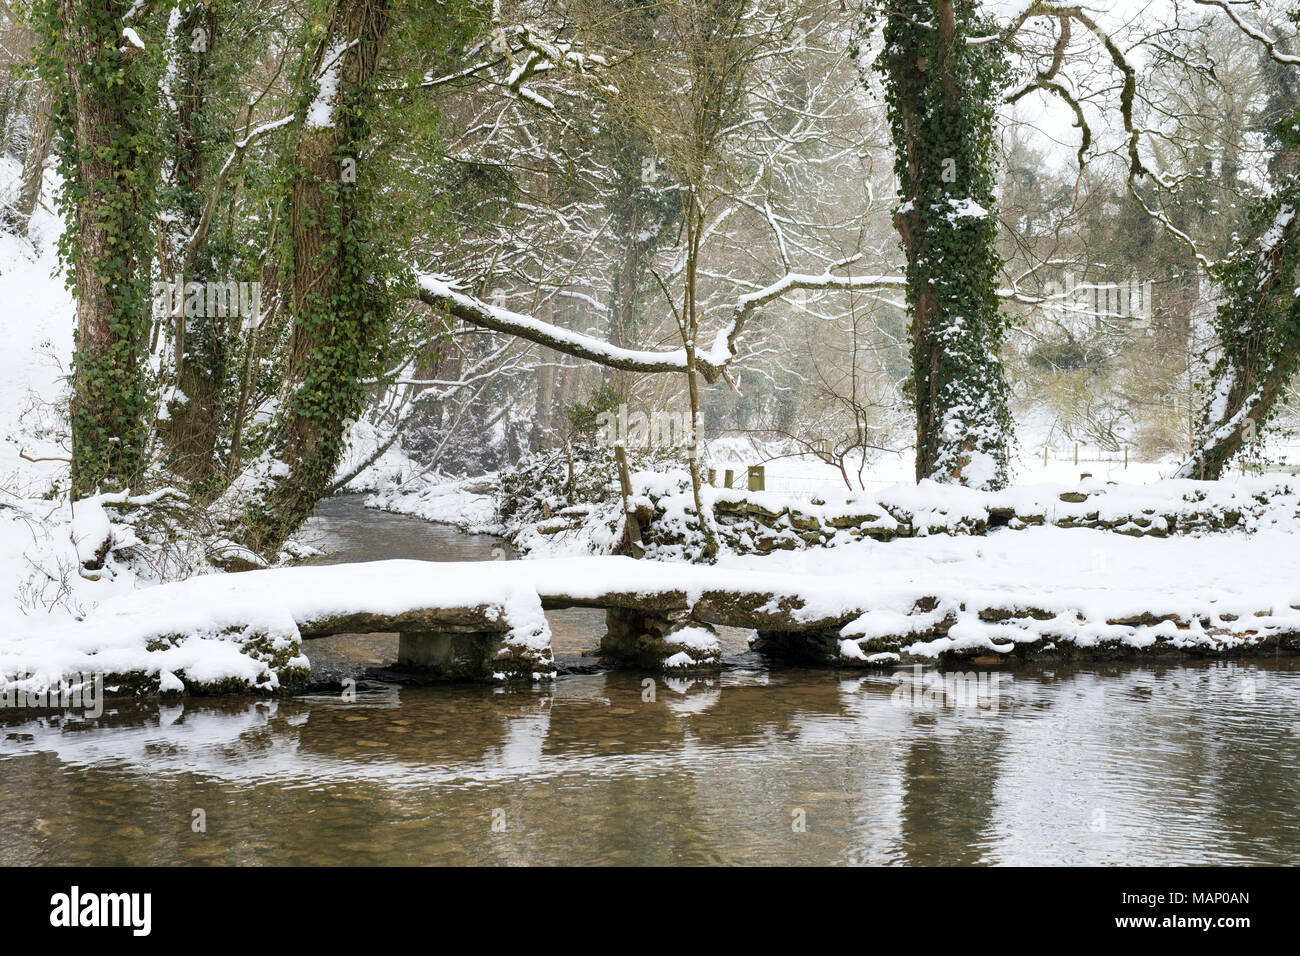 Ford and Clapper Bridge in winter snow on the river windrush at Kineton. Kineton, Gloucestershire, UK Stock Photo